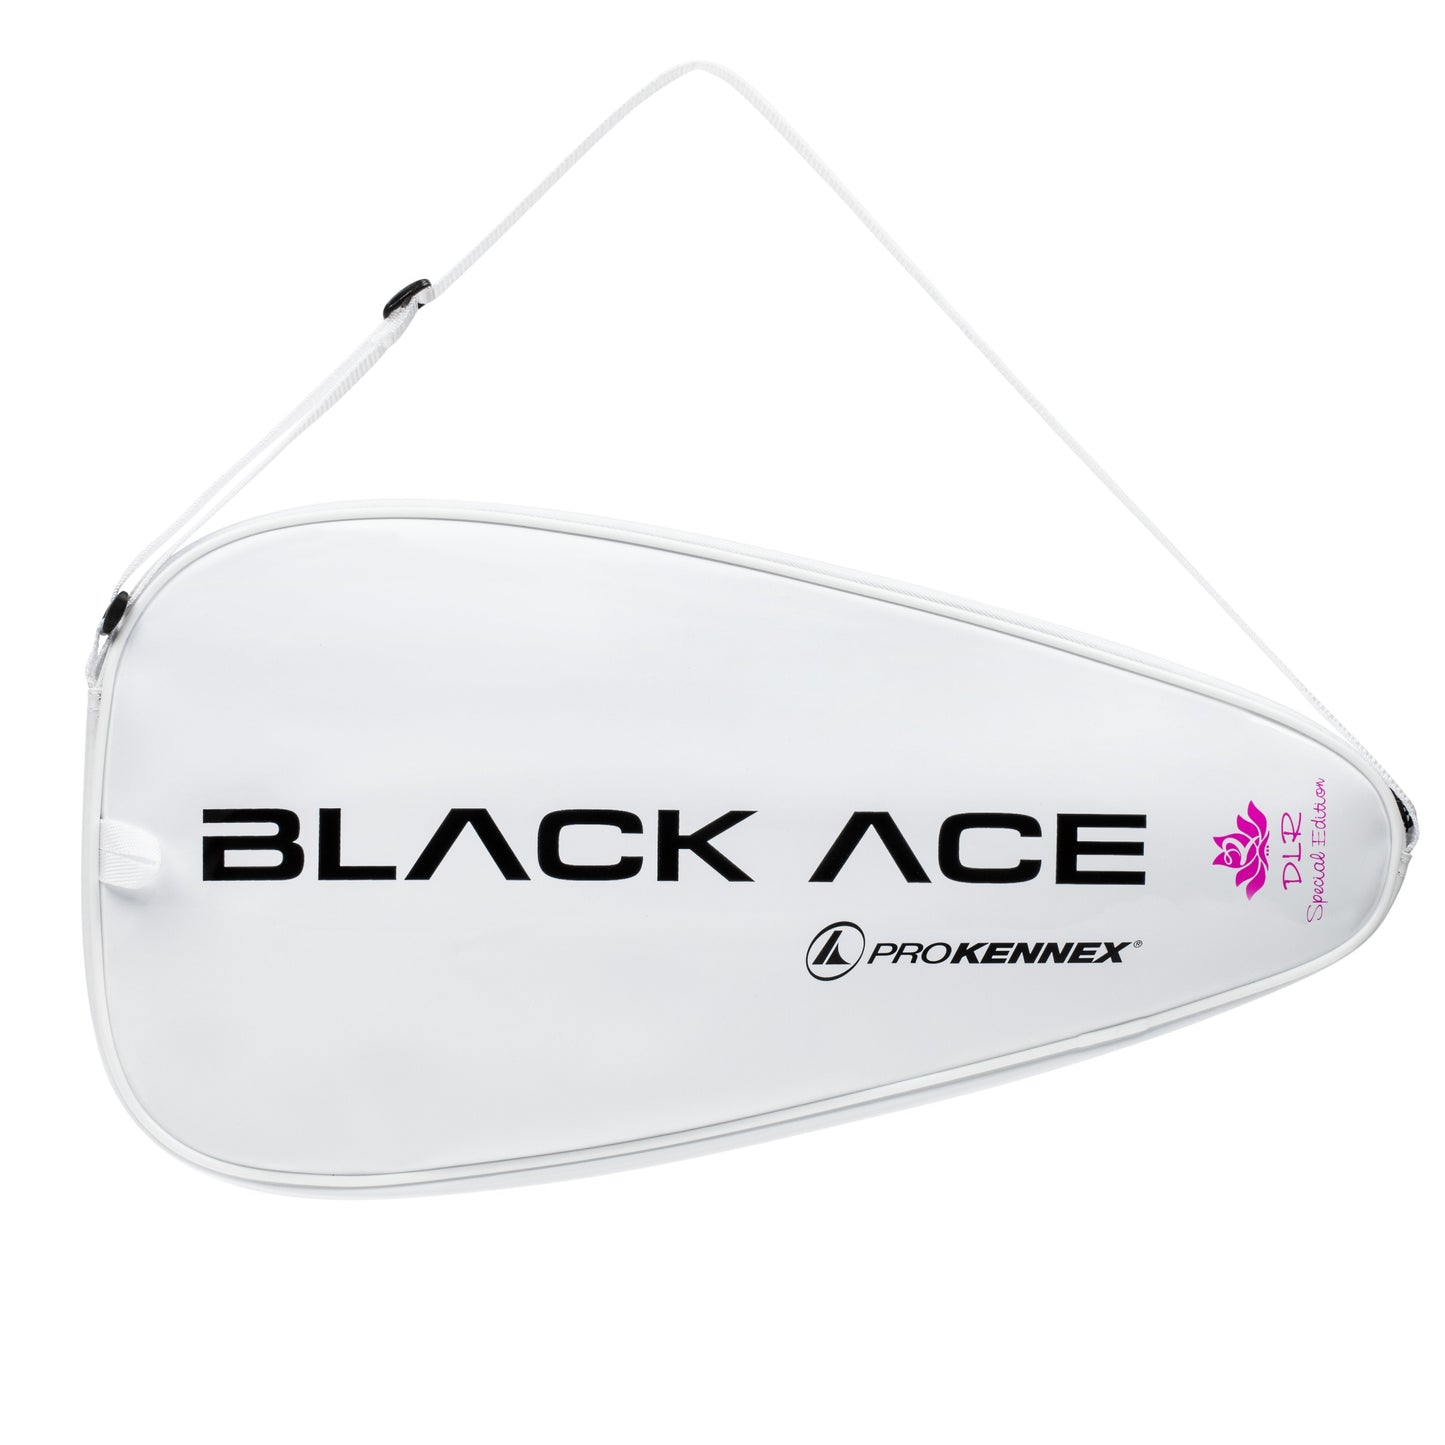 A ProKennex Black Ace LG Pickleball Paddle - Daniel de la Rosa Signature Edition racket with the word ProKennex on it.